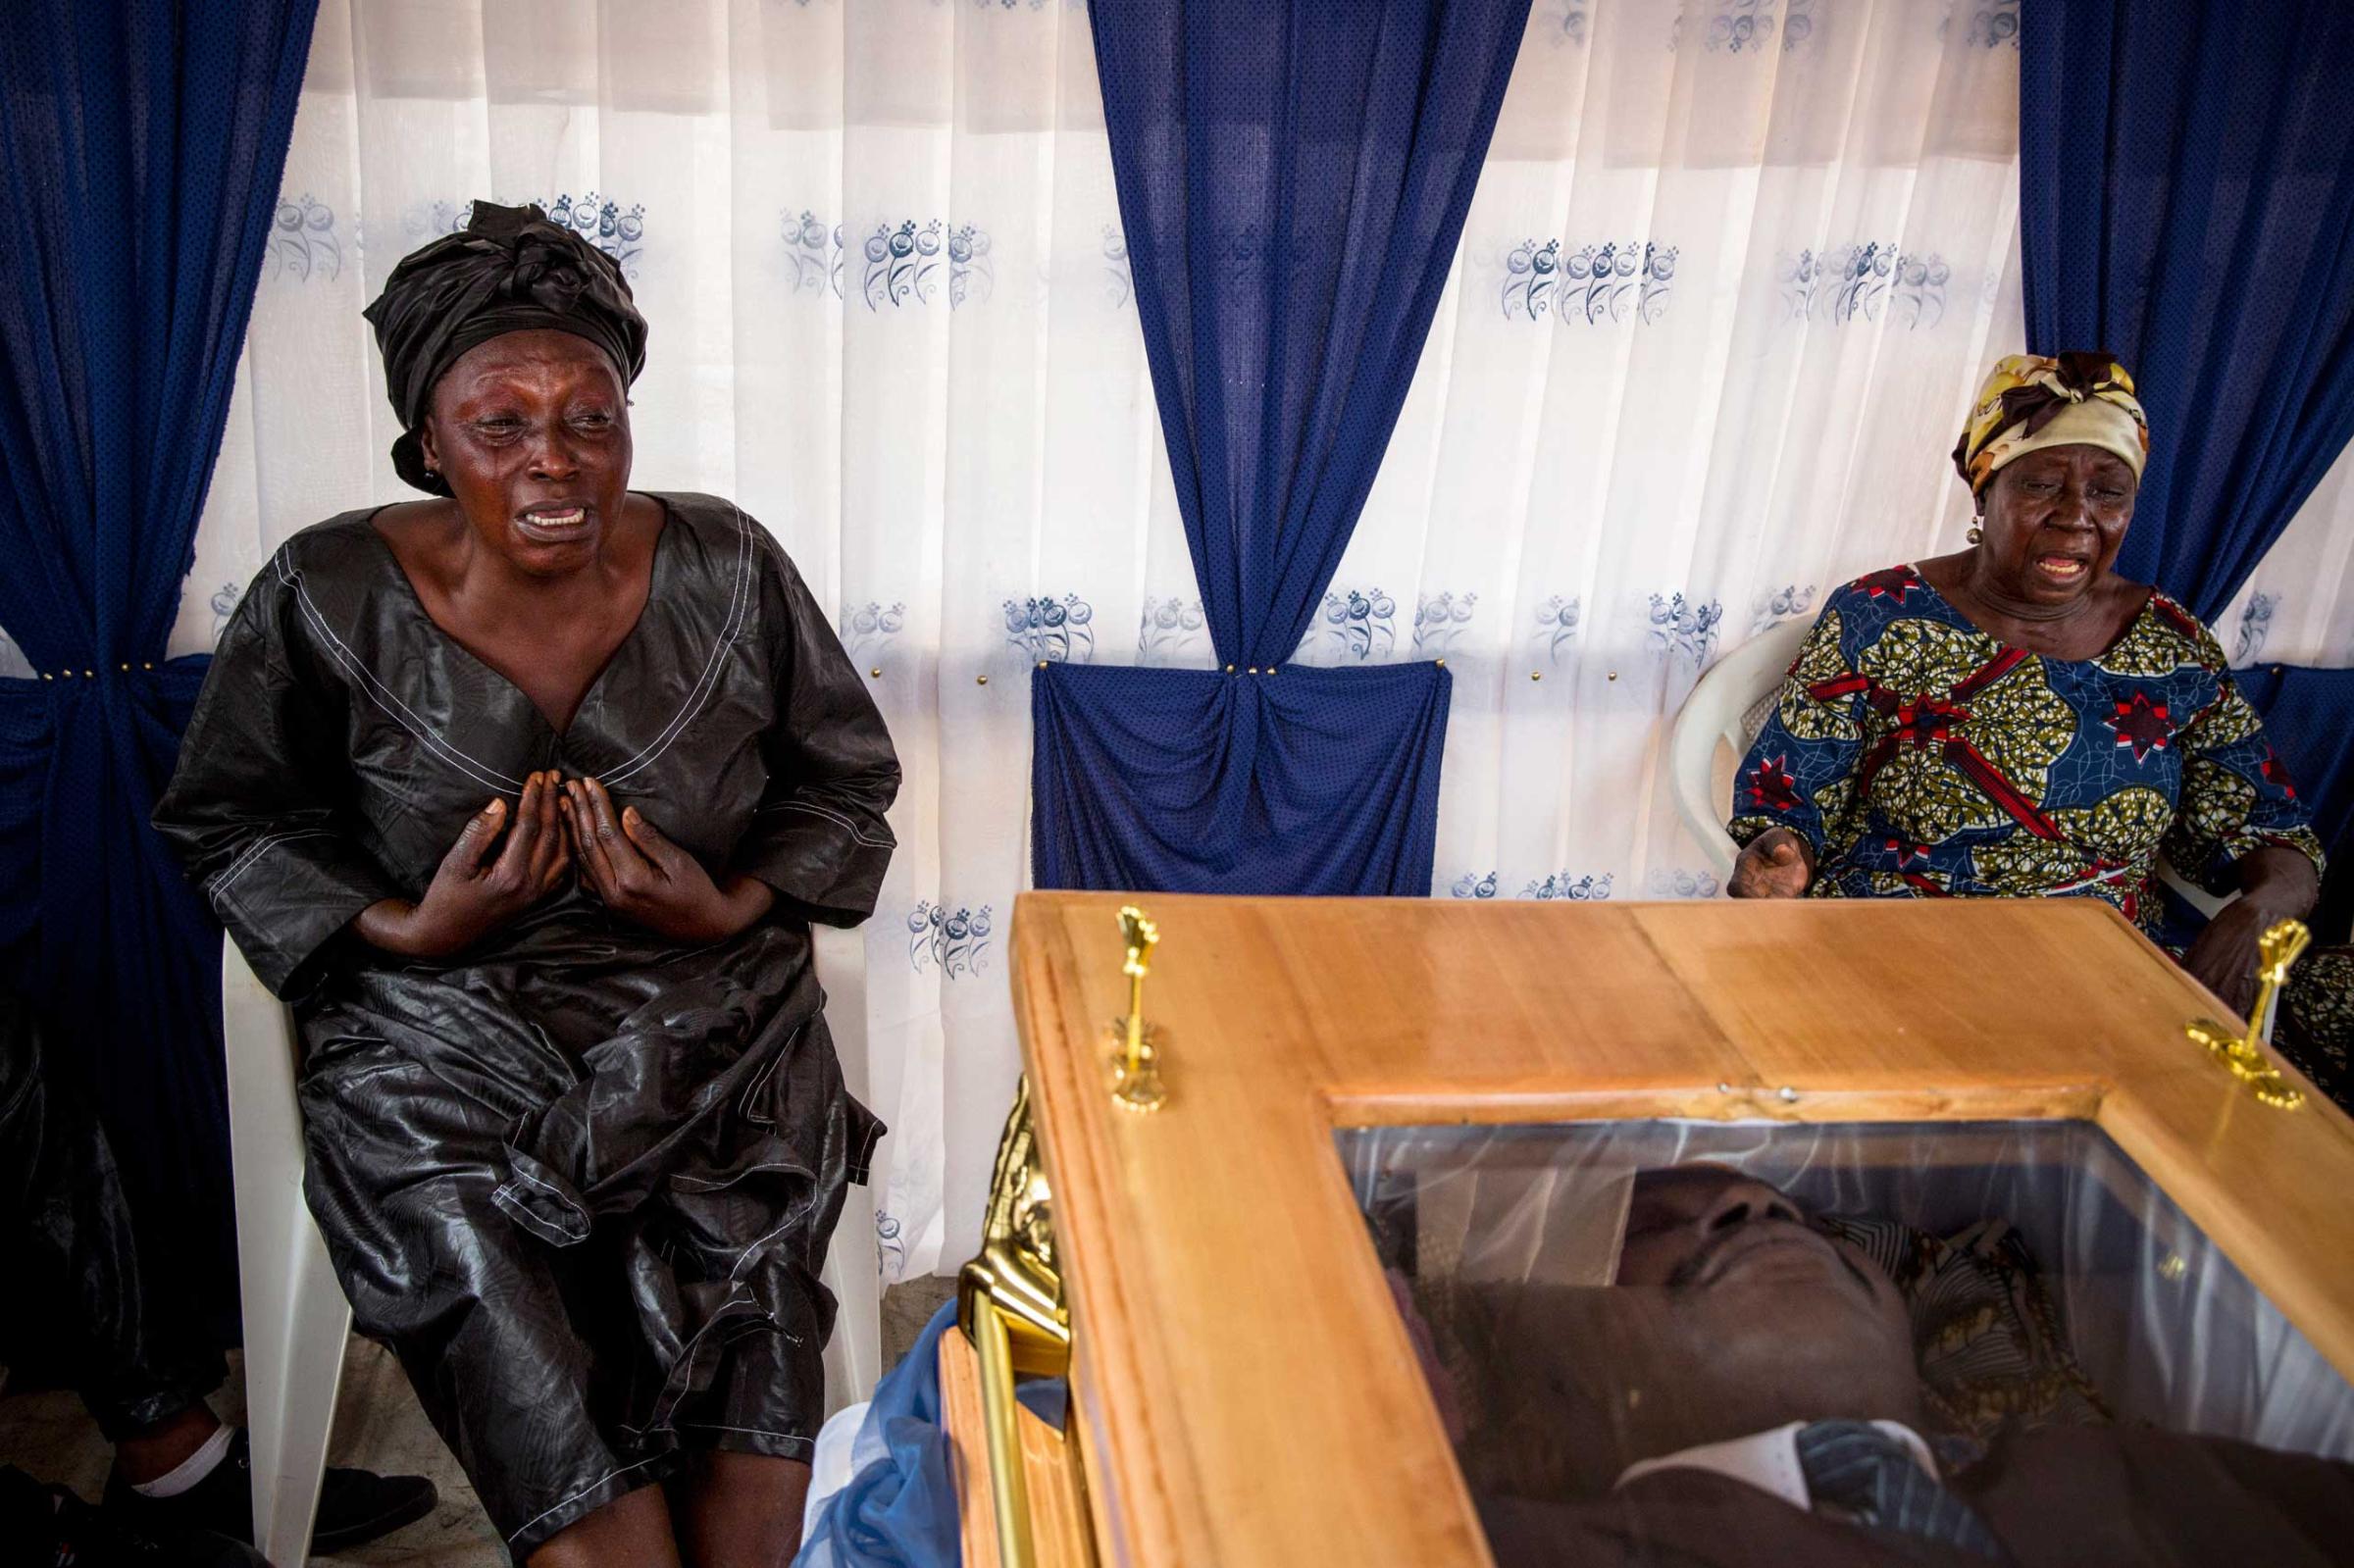 Central African RepublicBanguiRelatives touch the coffin at the funeral of Judge Modeste Martineau Bria who was killed by Seleka fighters in Bangui. The murder of Bria led to an outpouring of public anger at the reign of fear imposed by Seleka fighters who have refused to disband following the December 2012 coup against former president Francois Bozize.